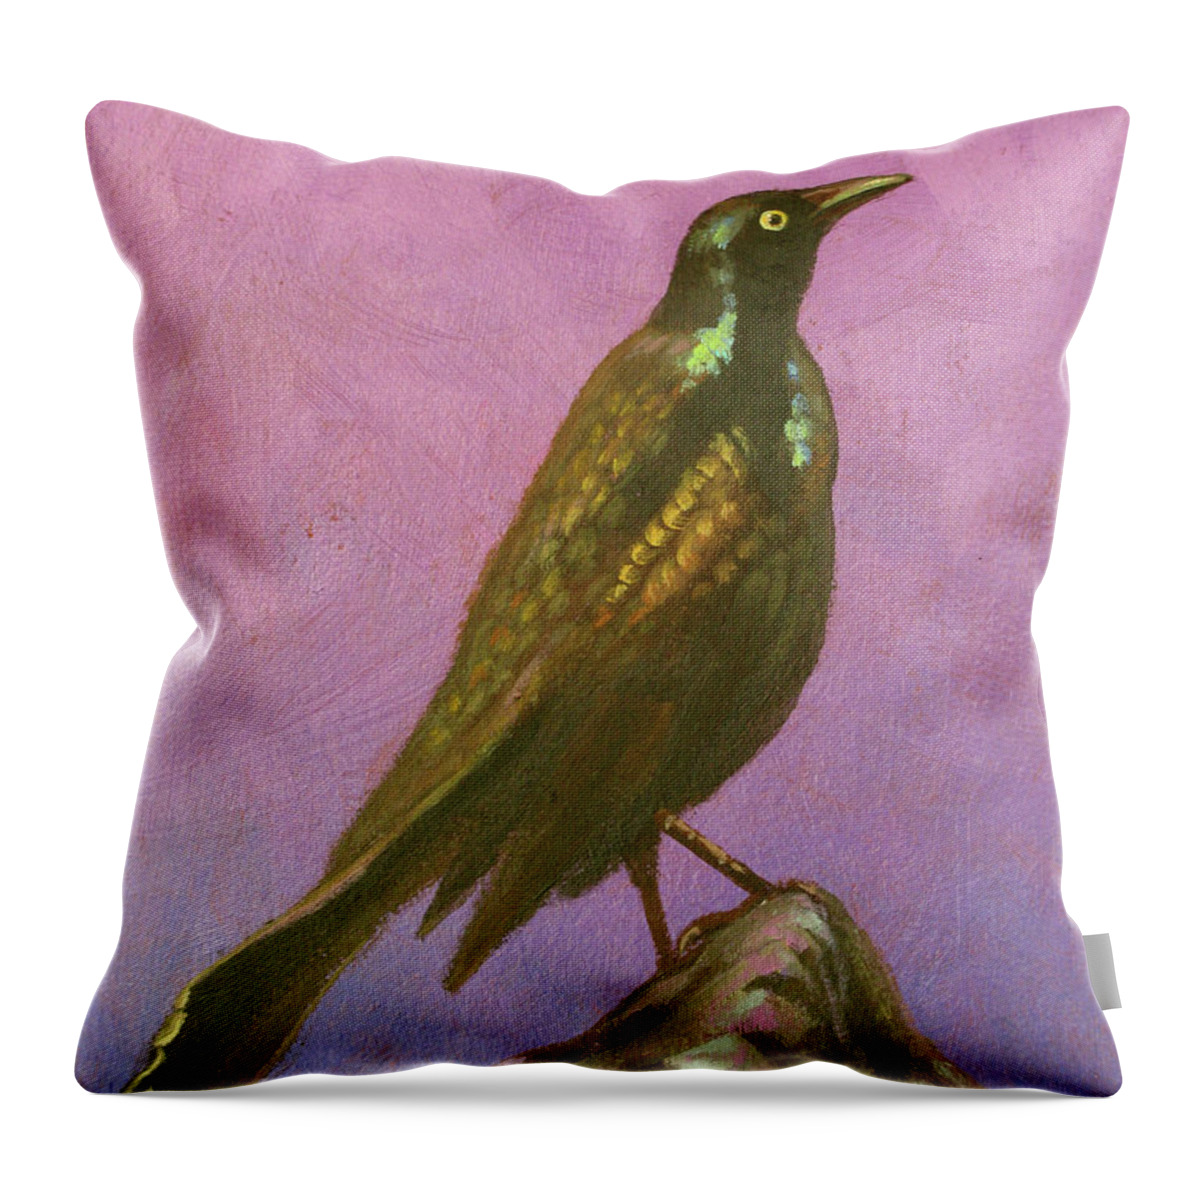 Grackle Throw Pillow featuring the painting Rev, Carl Blunderbuss by Don Morgan